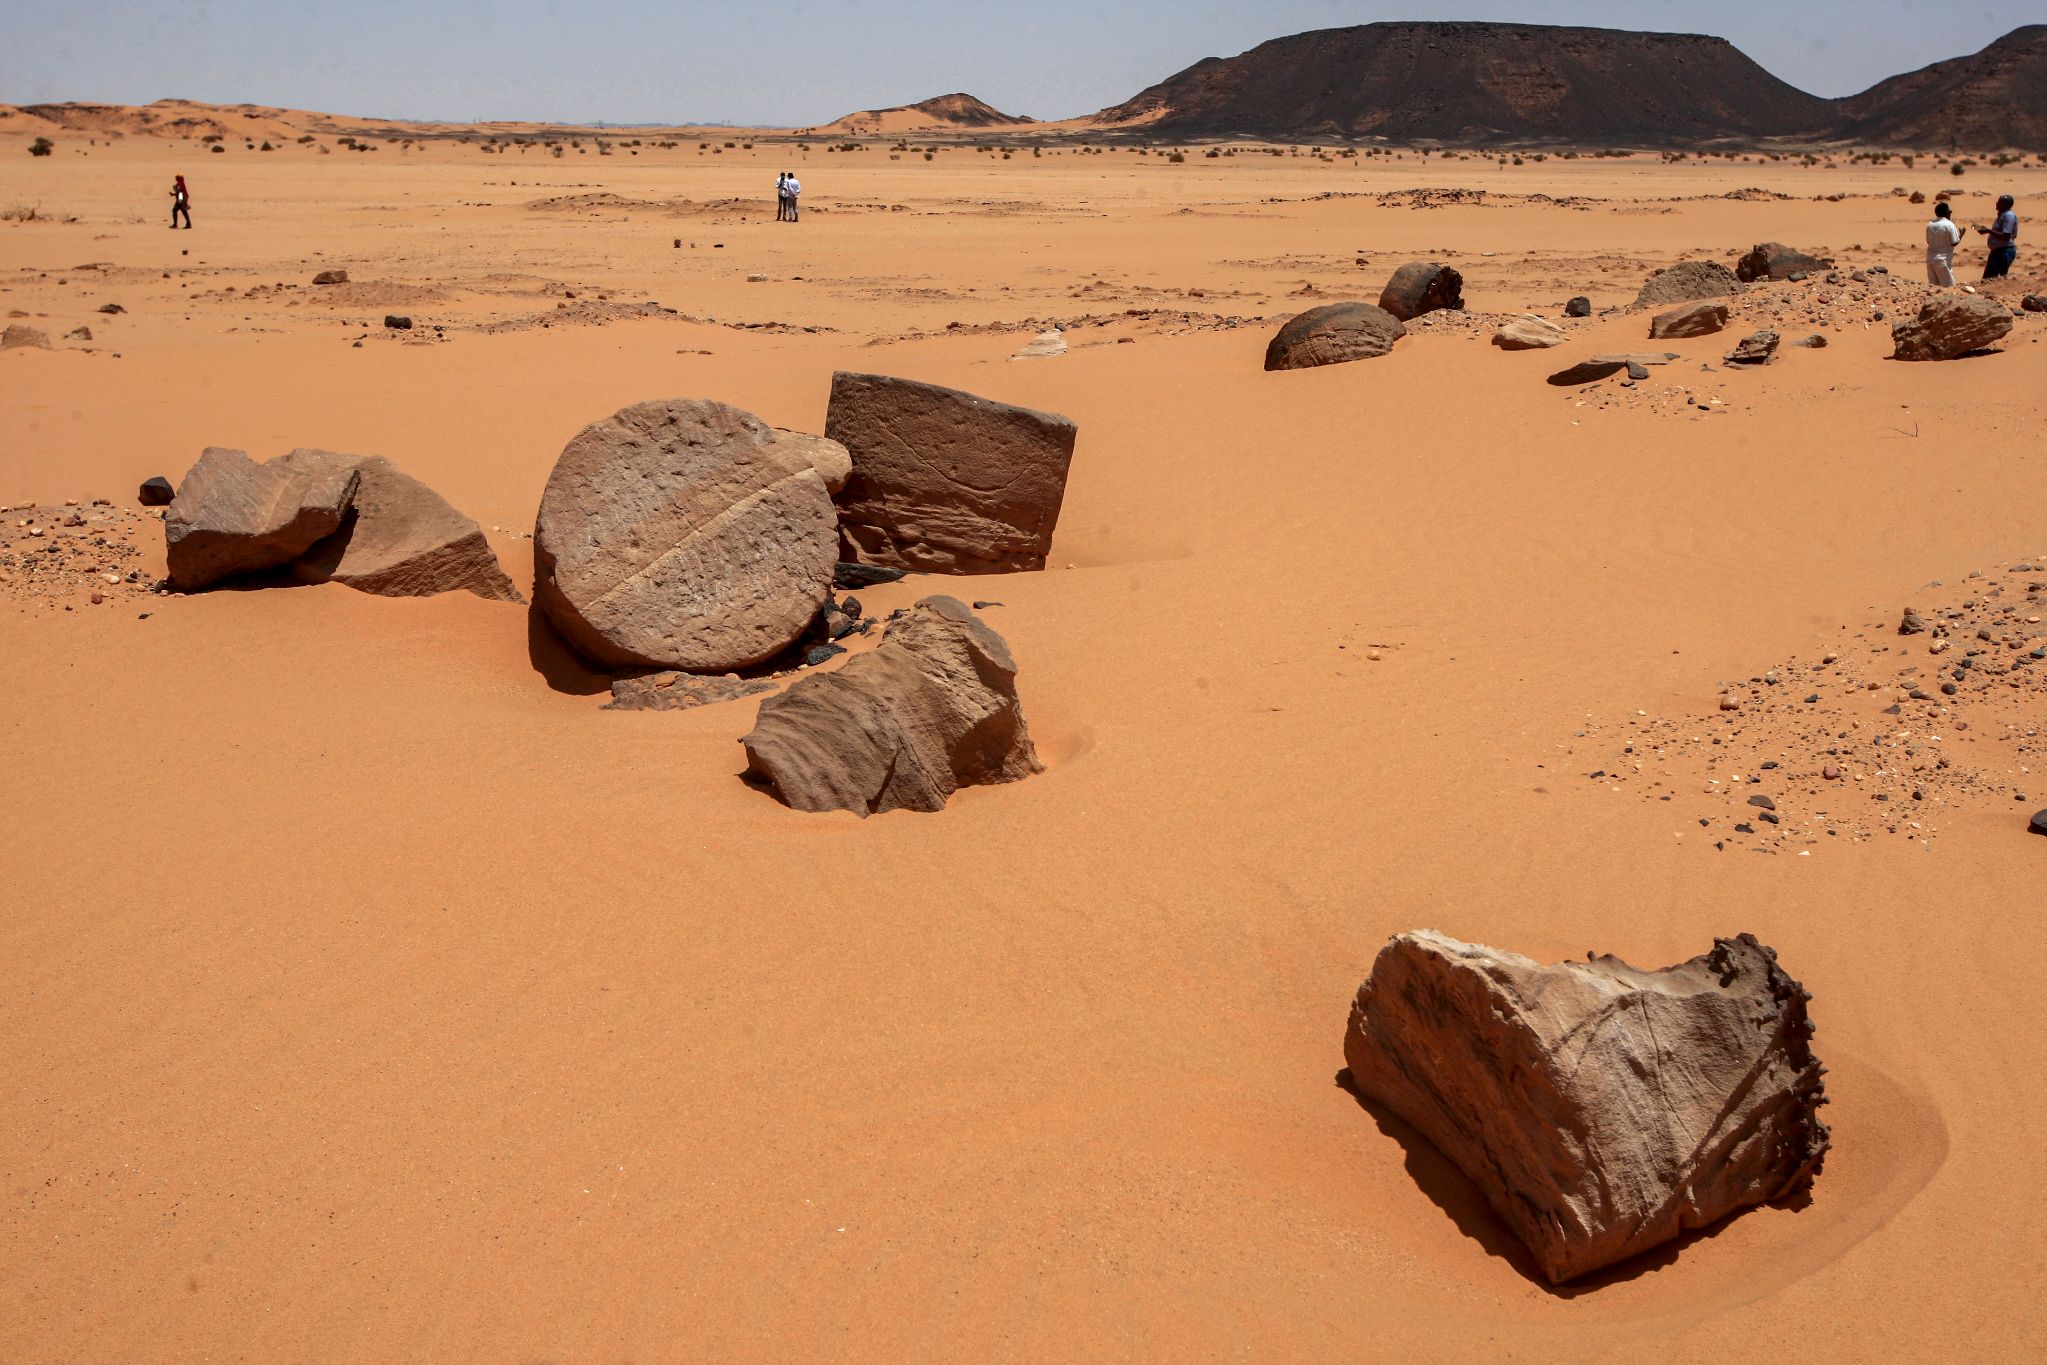 Sudan, illegal gold diggers destroy 2,000-year-old archaeological site